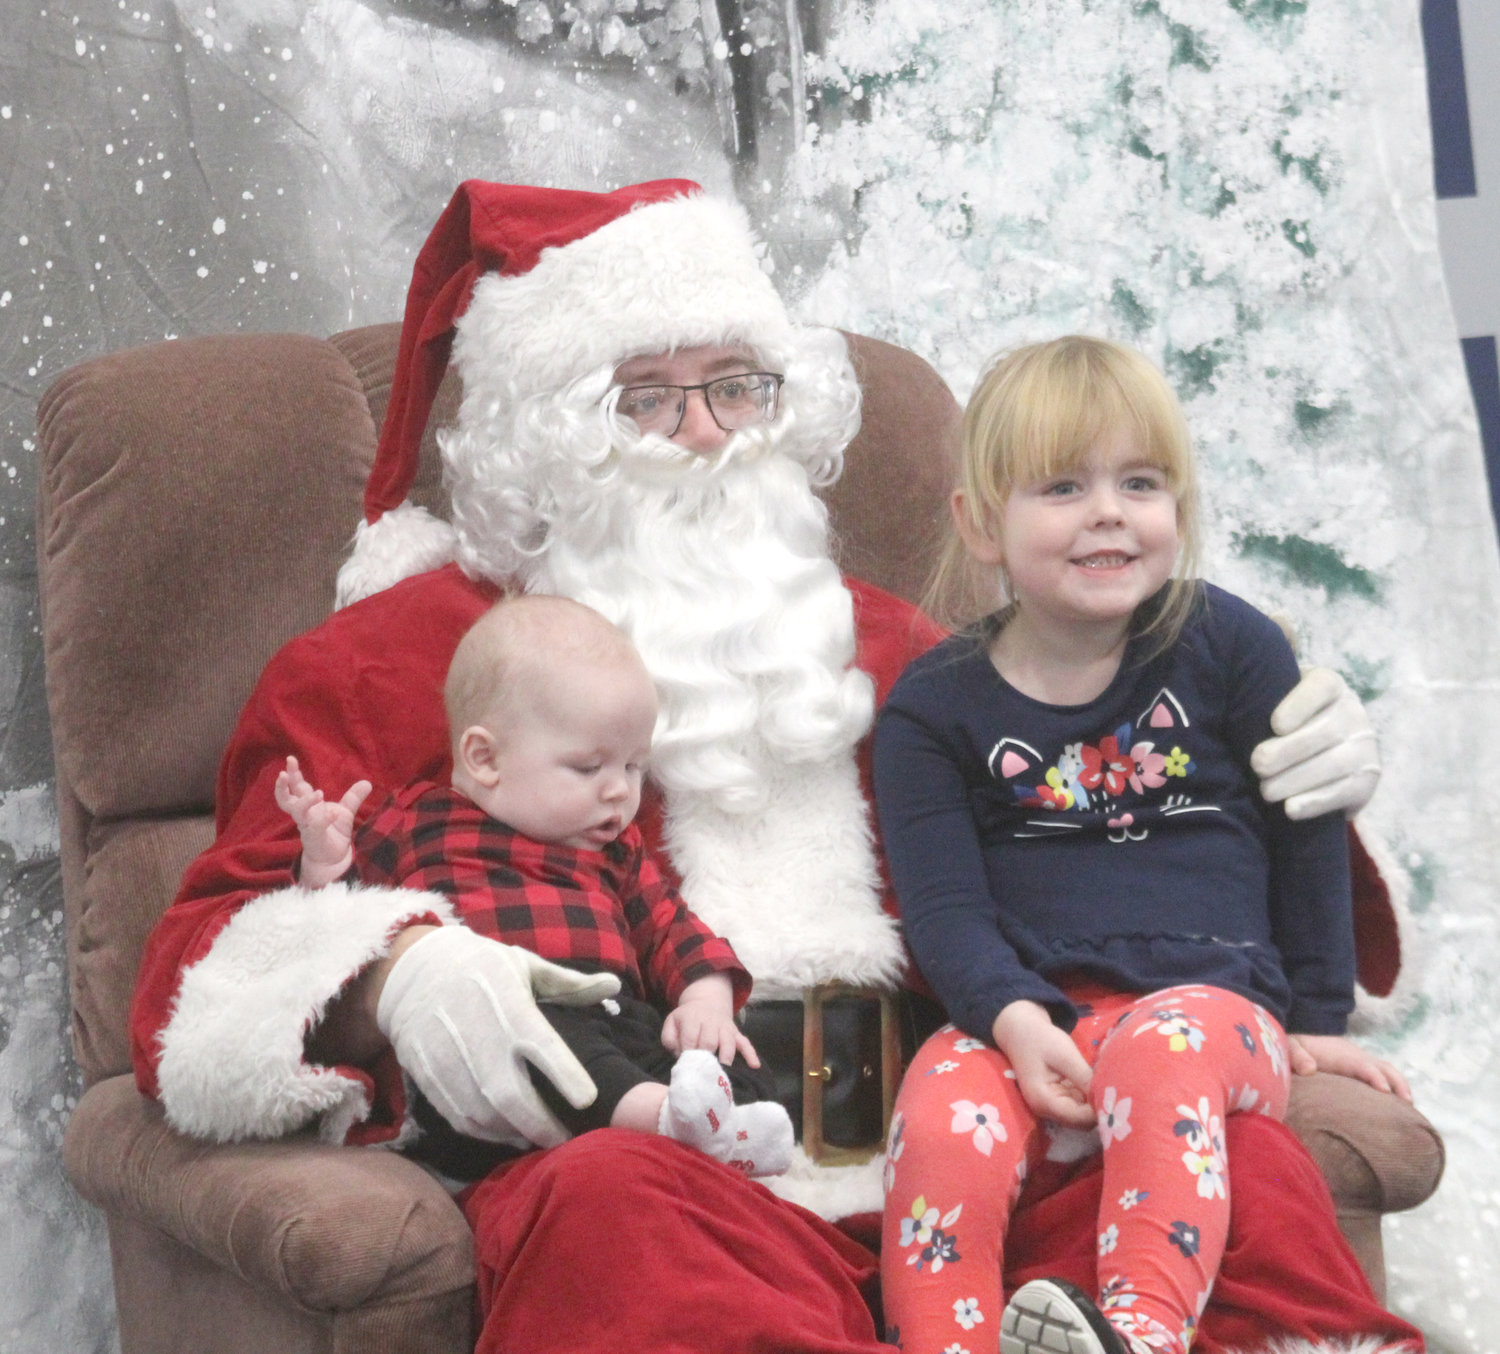 Anthony and Hope Peterson visit with Santa at the Kalona Community Center on Dec. 7.